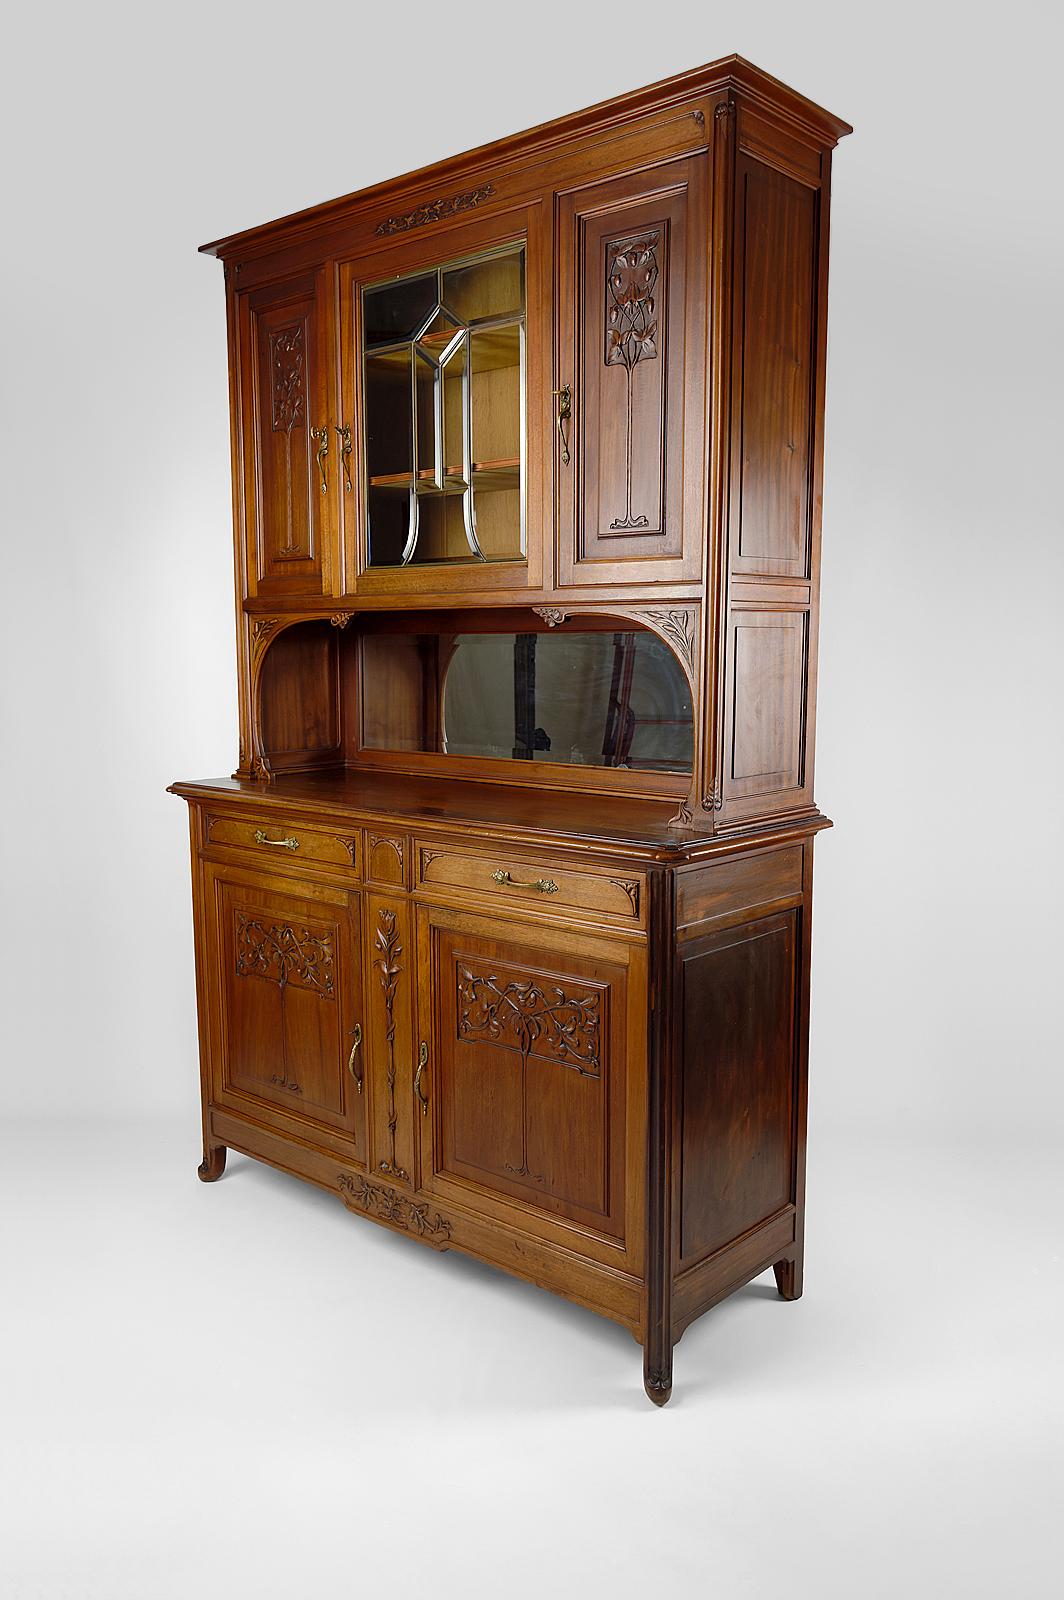 Beveled French Art Nouveau Sideboard in Carved Walnut with Stained Glass, circa 1910 For Sale